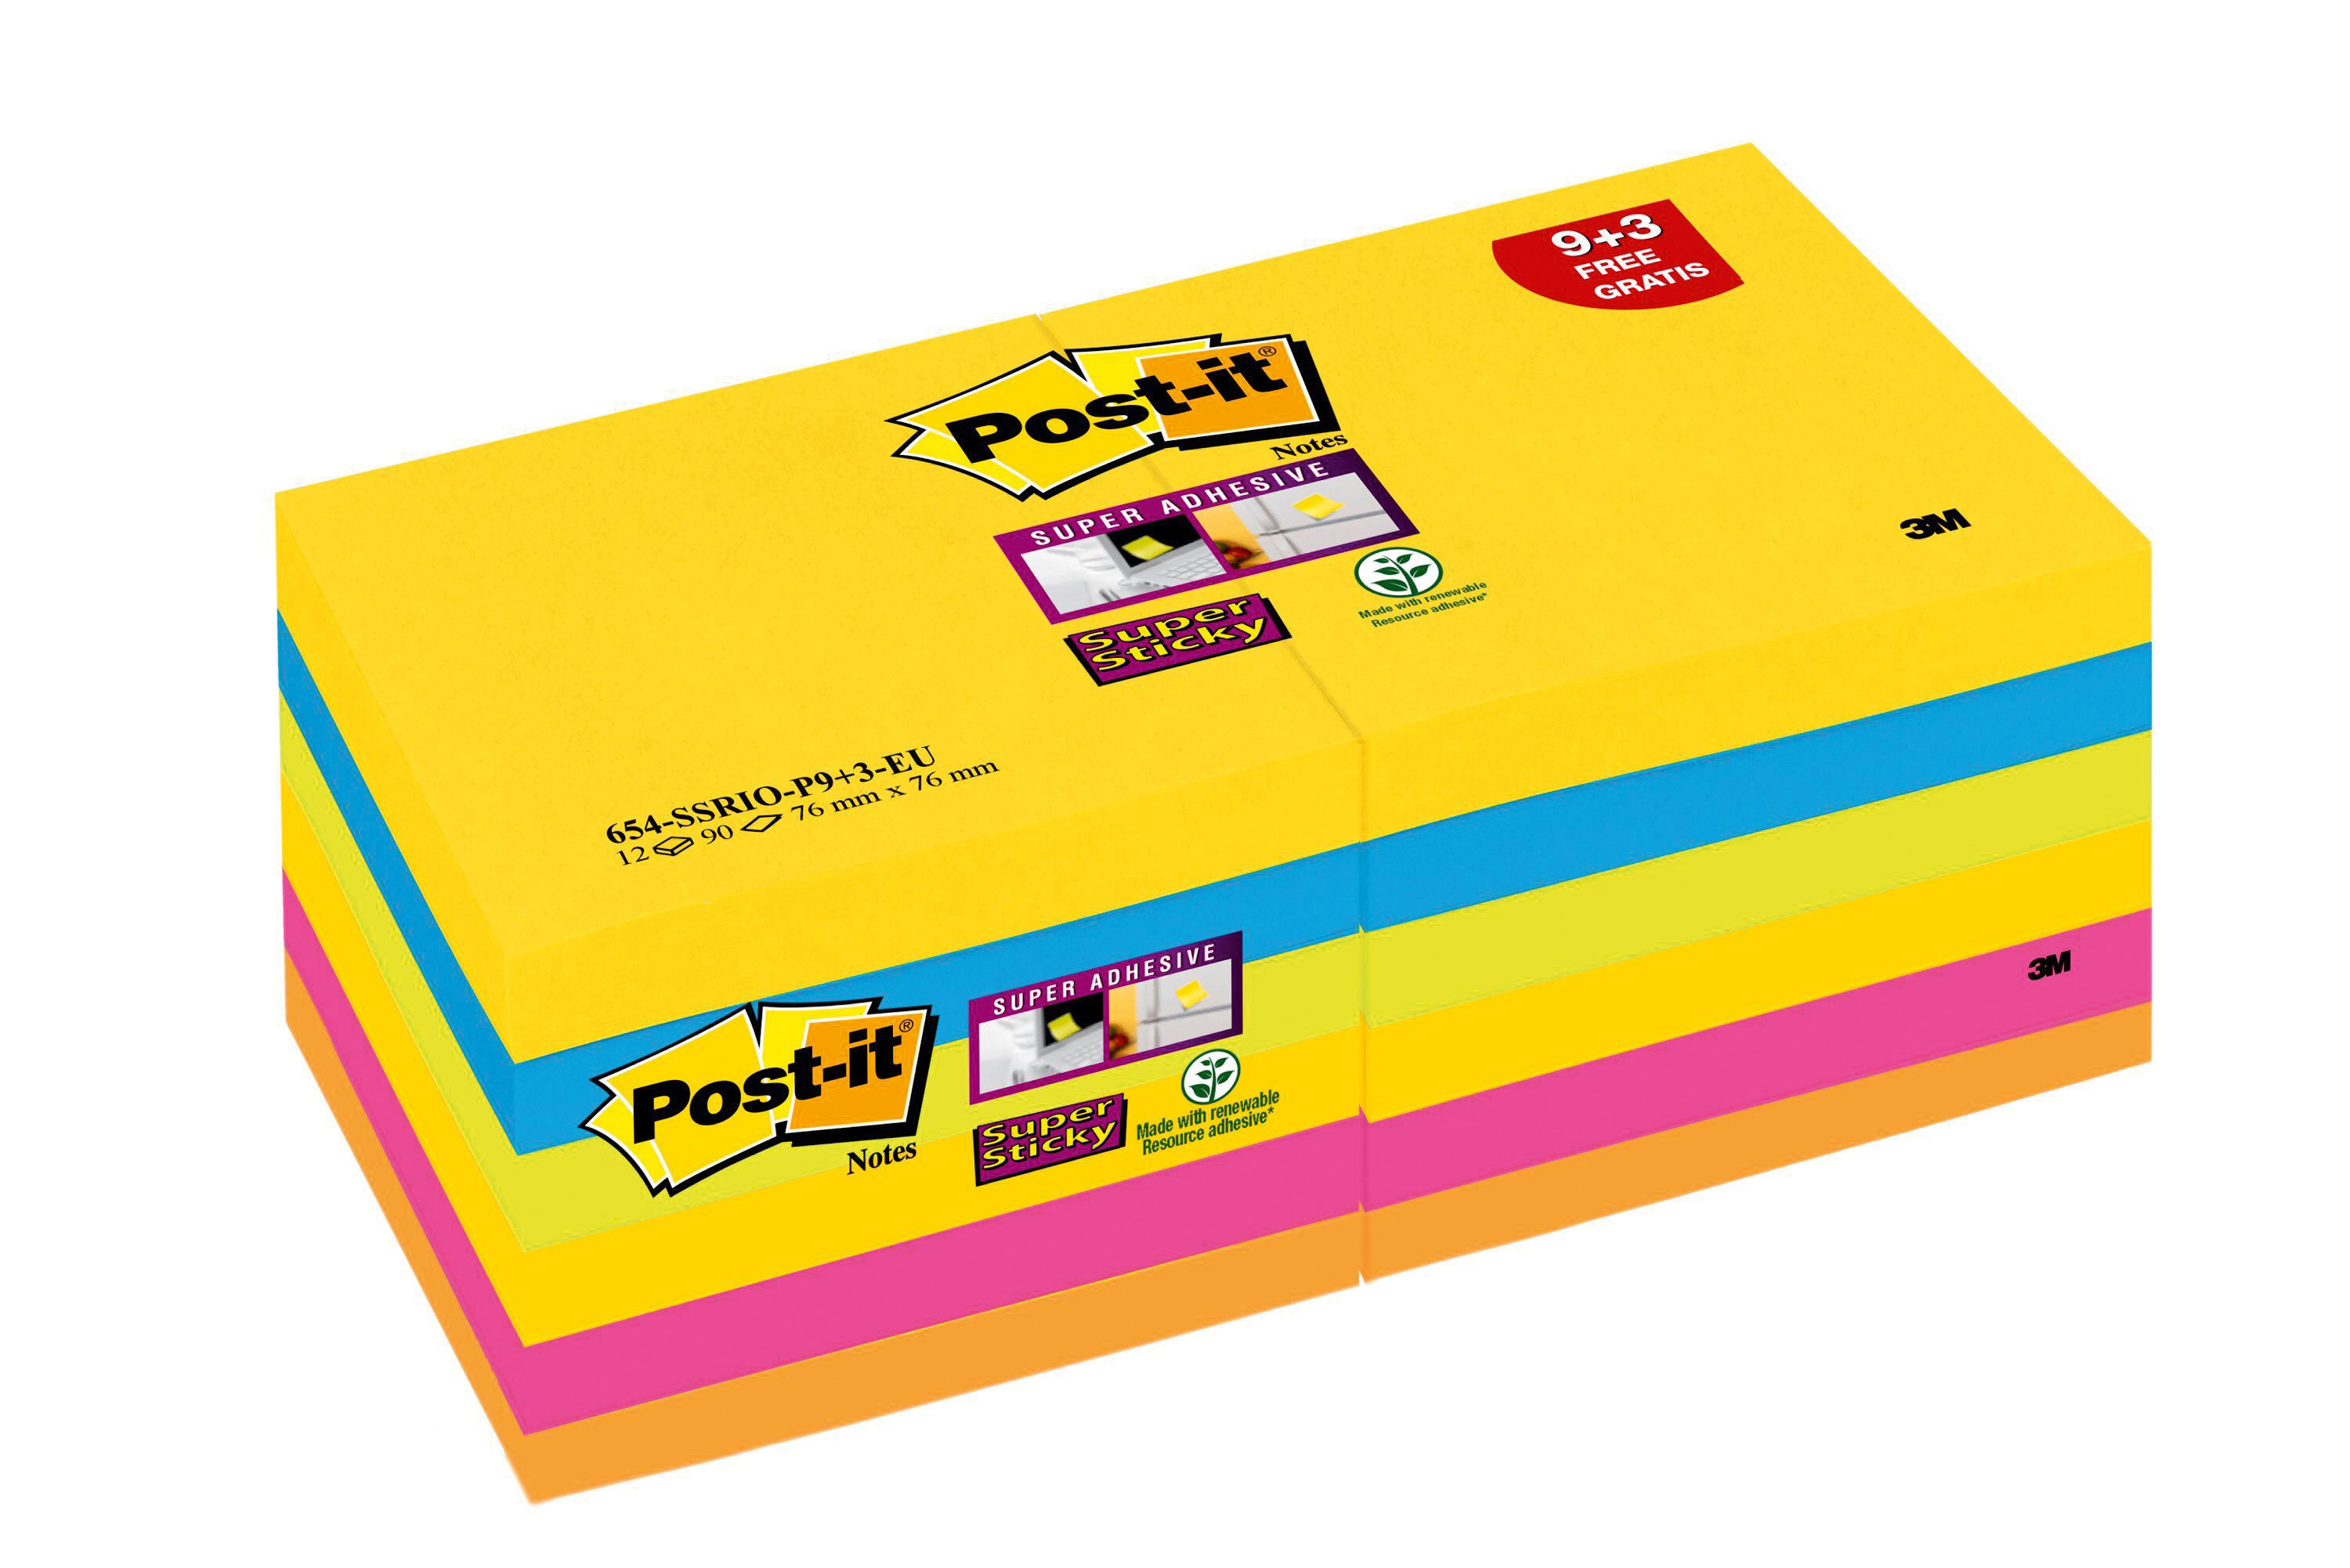 POST-IT Super Sticky Notes 76x76mm 654-SS-CARN-P8+4 Carnival 5 couleurs 12x90 flls